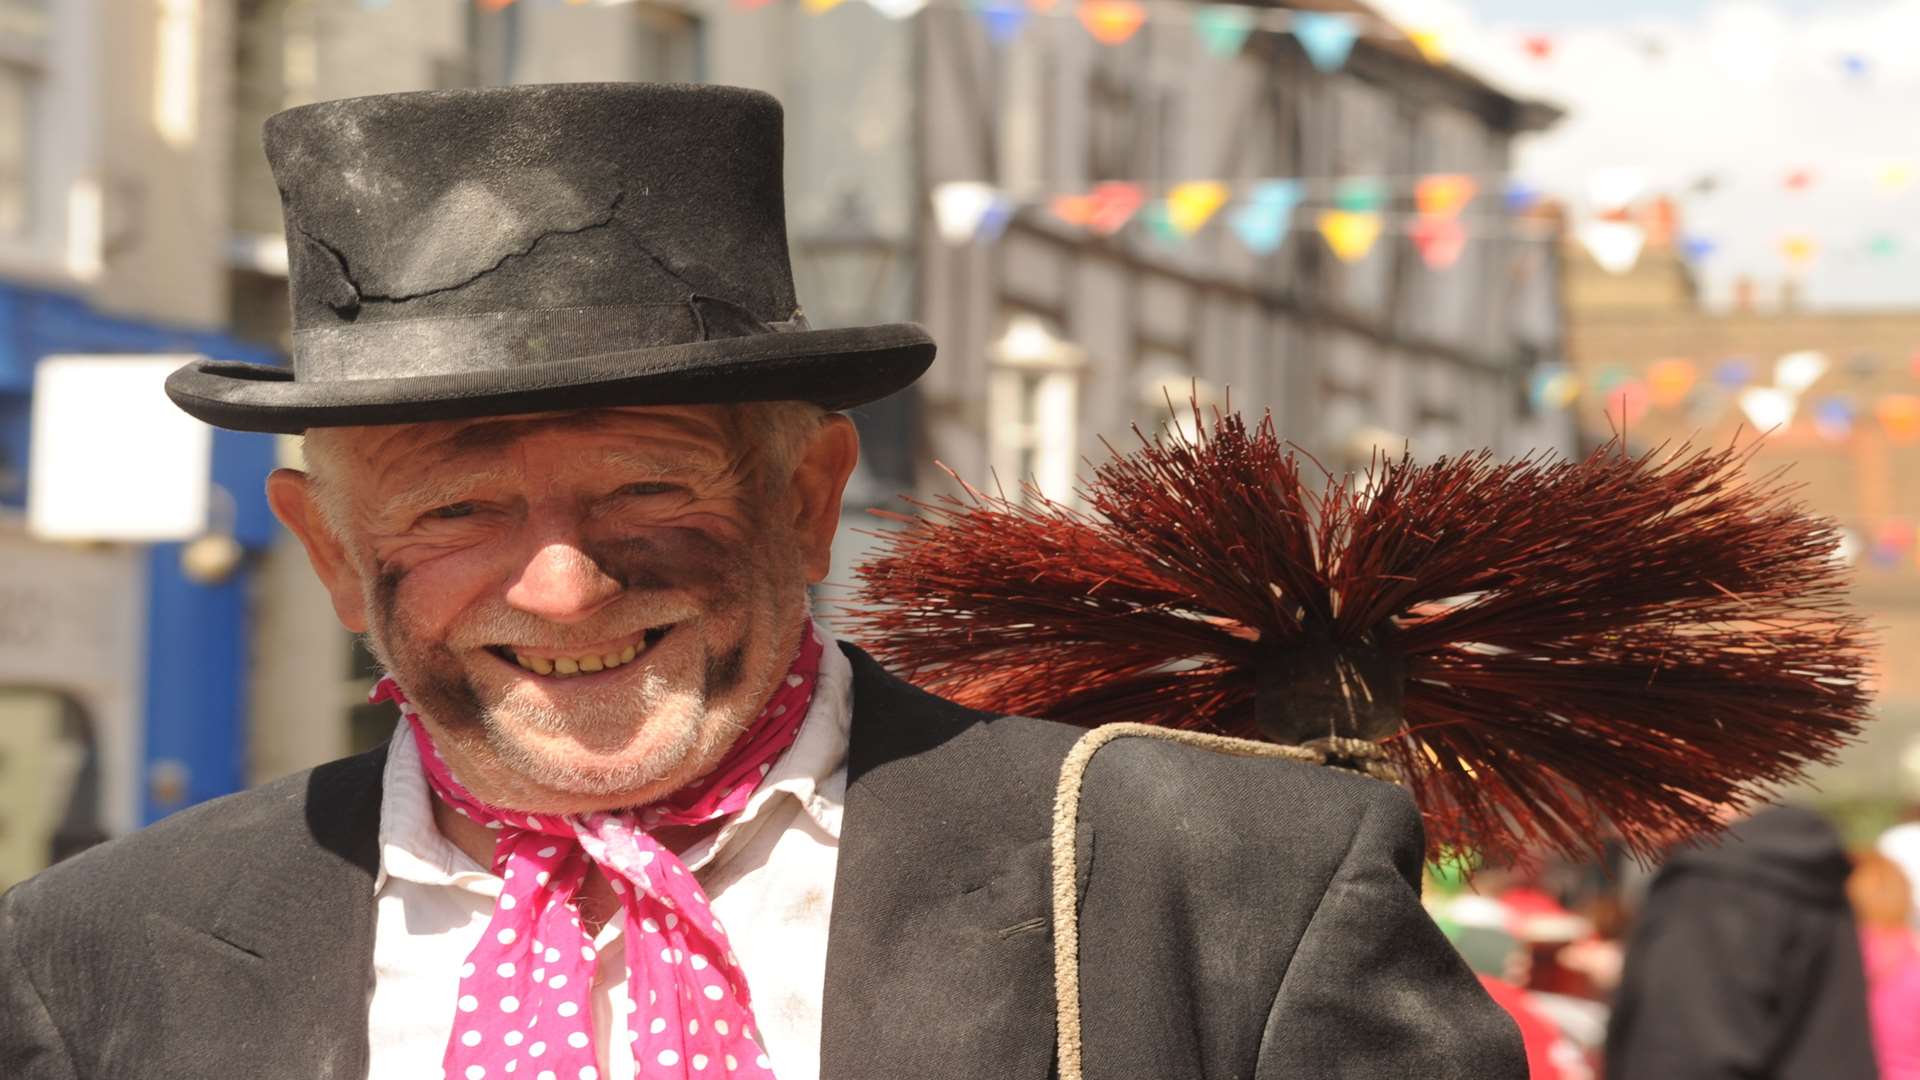 The Sweeps Festival takes place in Rochester High Street this weekend